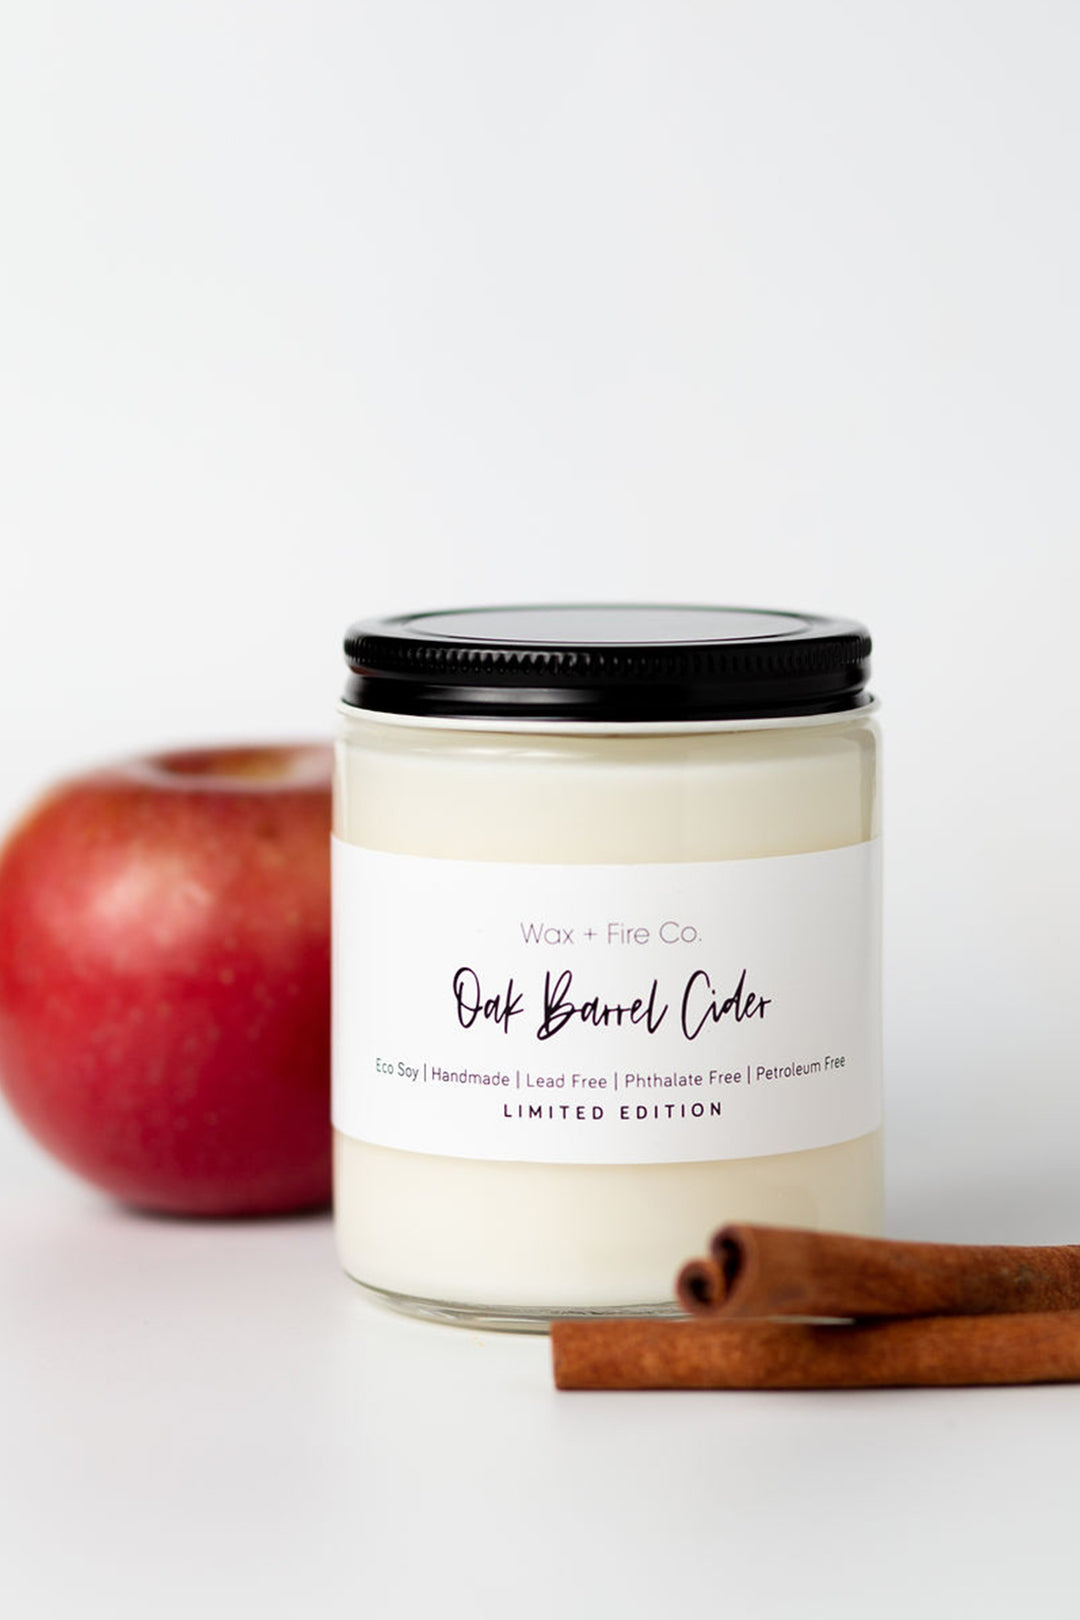 Wax + Fire Co soy holiday limited edition handmade vegan candles for fall and winter - Oak Barrel Cider